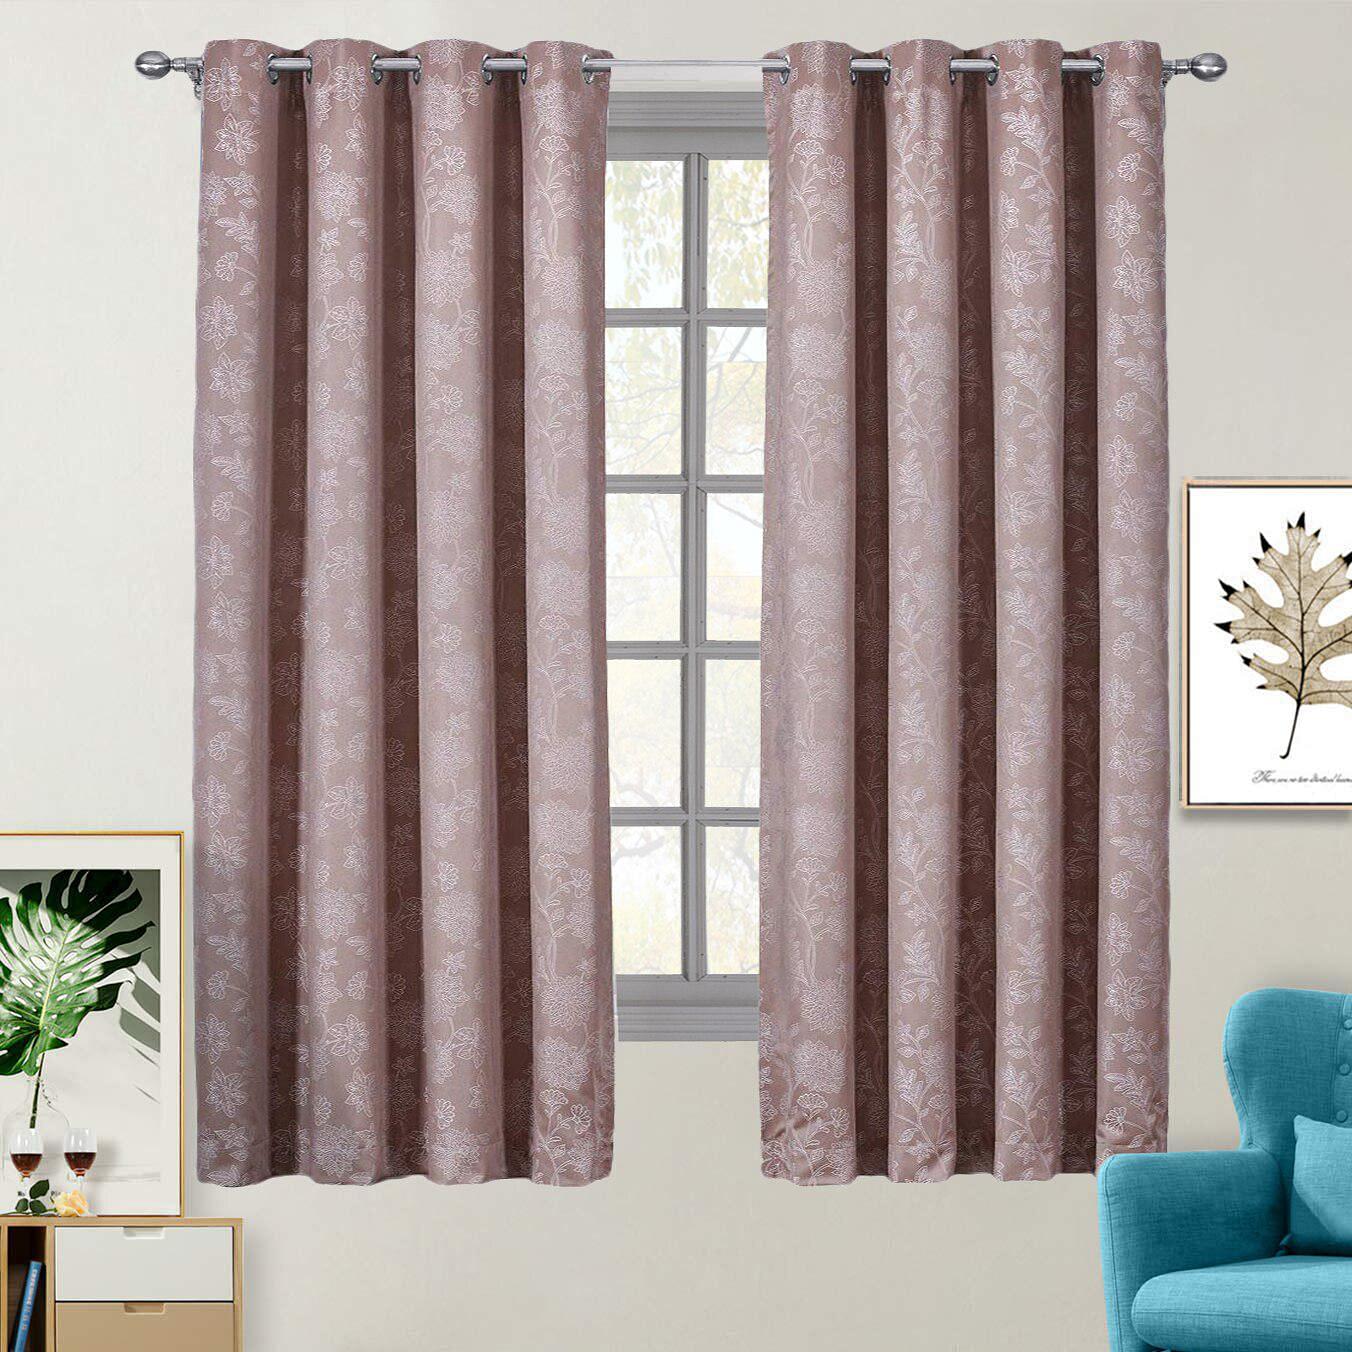 100% Blackout Curtain Panels Fannie - Woven Jacquard Triple Pass Thermal Insulated (Set of 2 Panels)